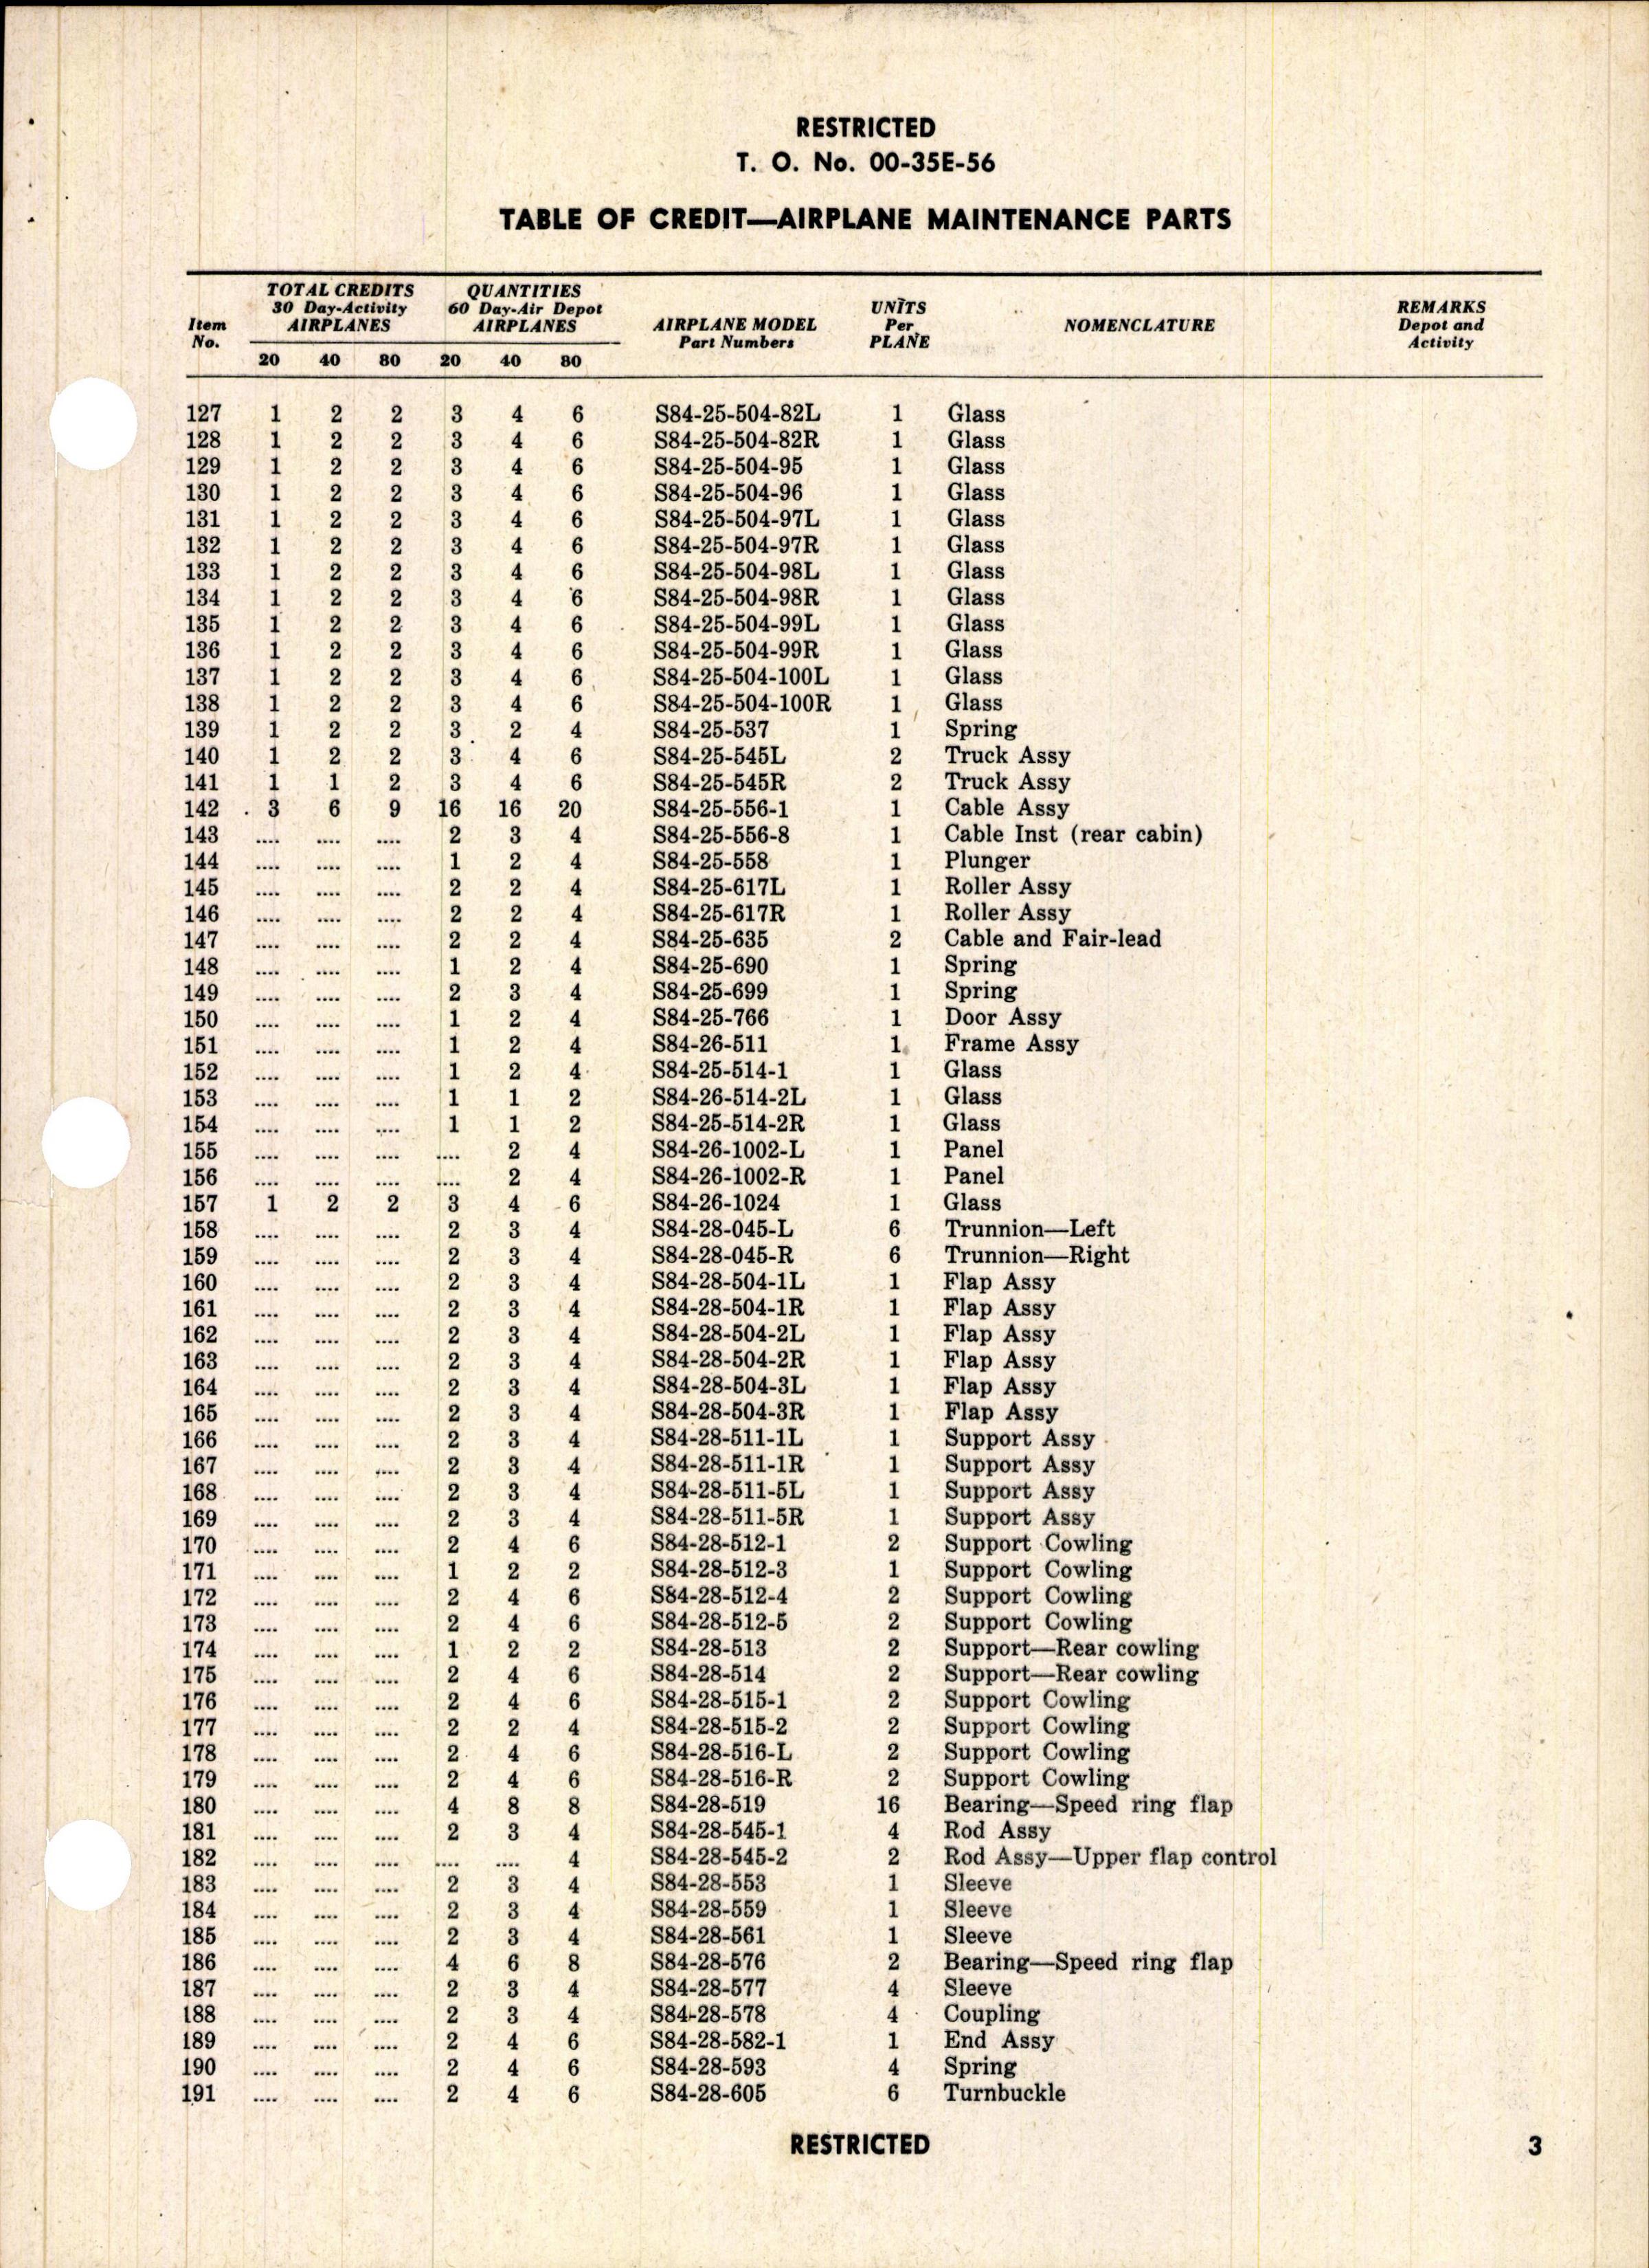 Sample page 5 from AirCorps Library document: Table of Credit Airplane Maintenance Parts for RA-25 and RA-25A Airplanes